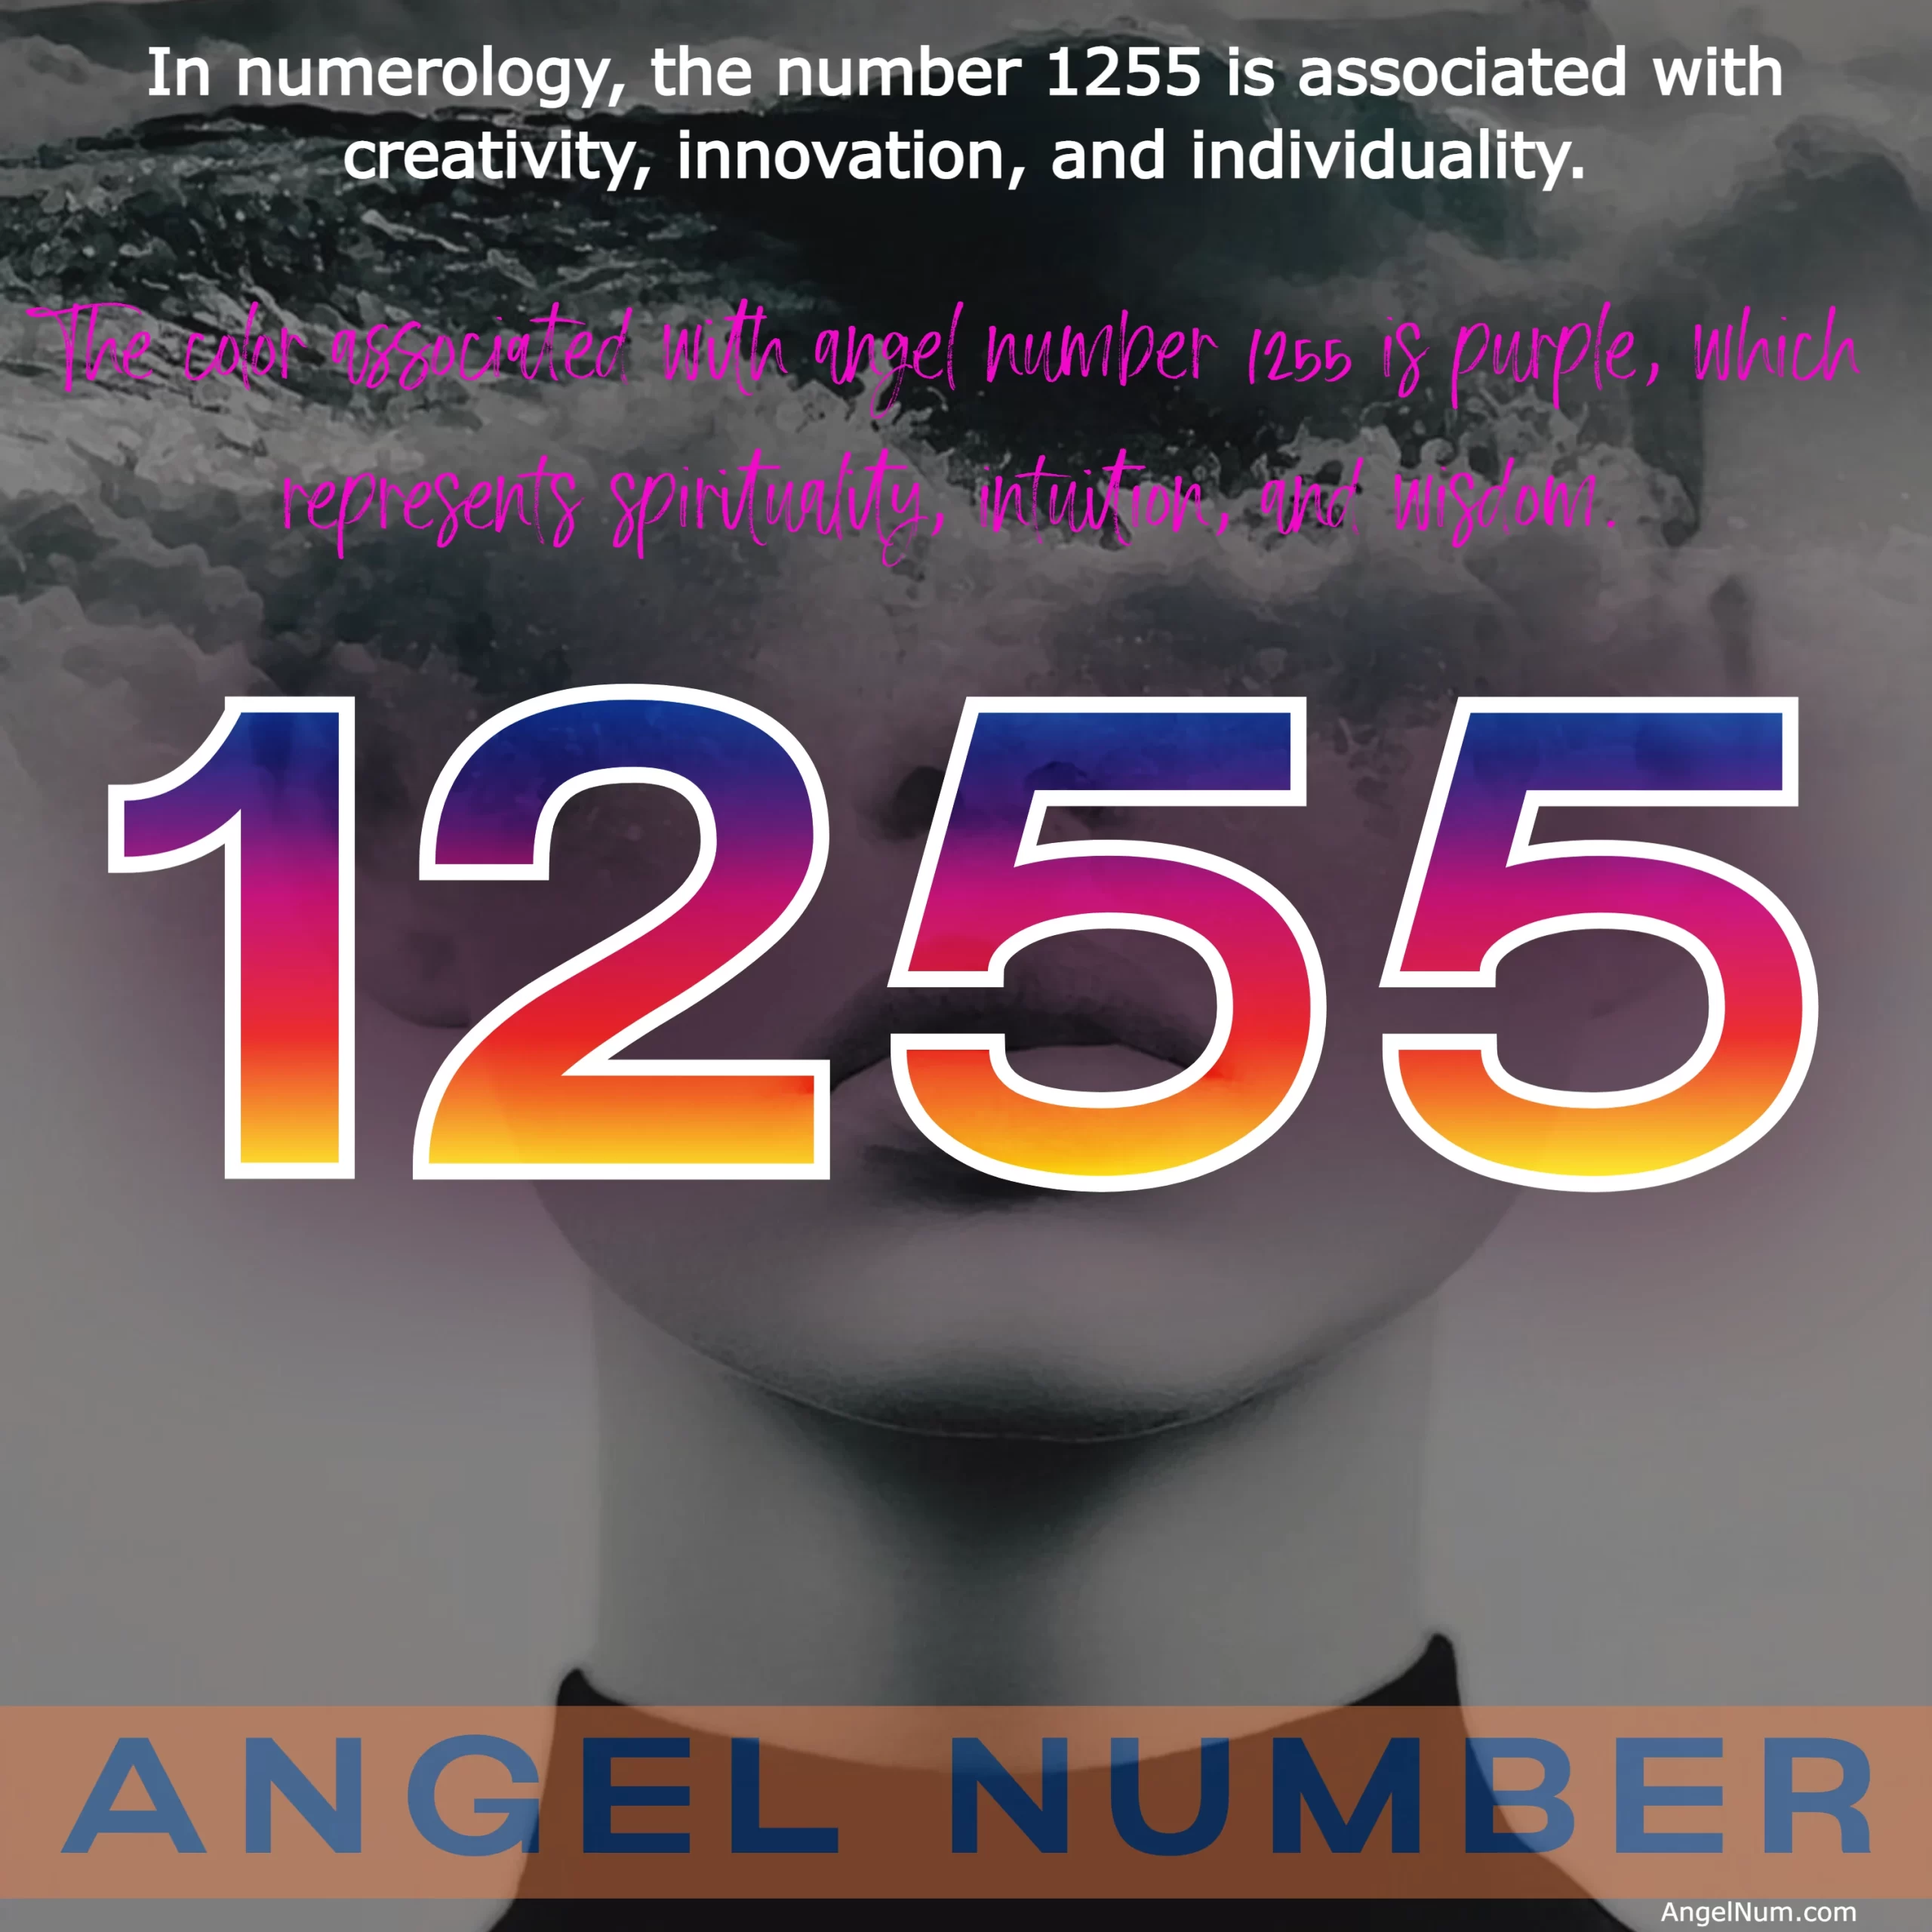 Angel Number 1255: Meaning, Symbolism, and Significance